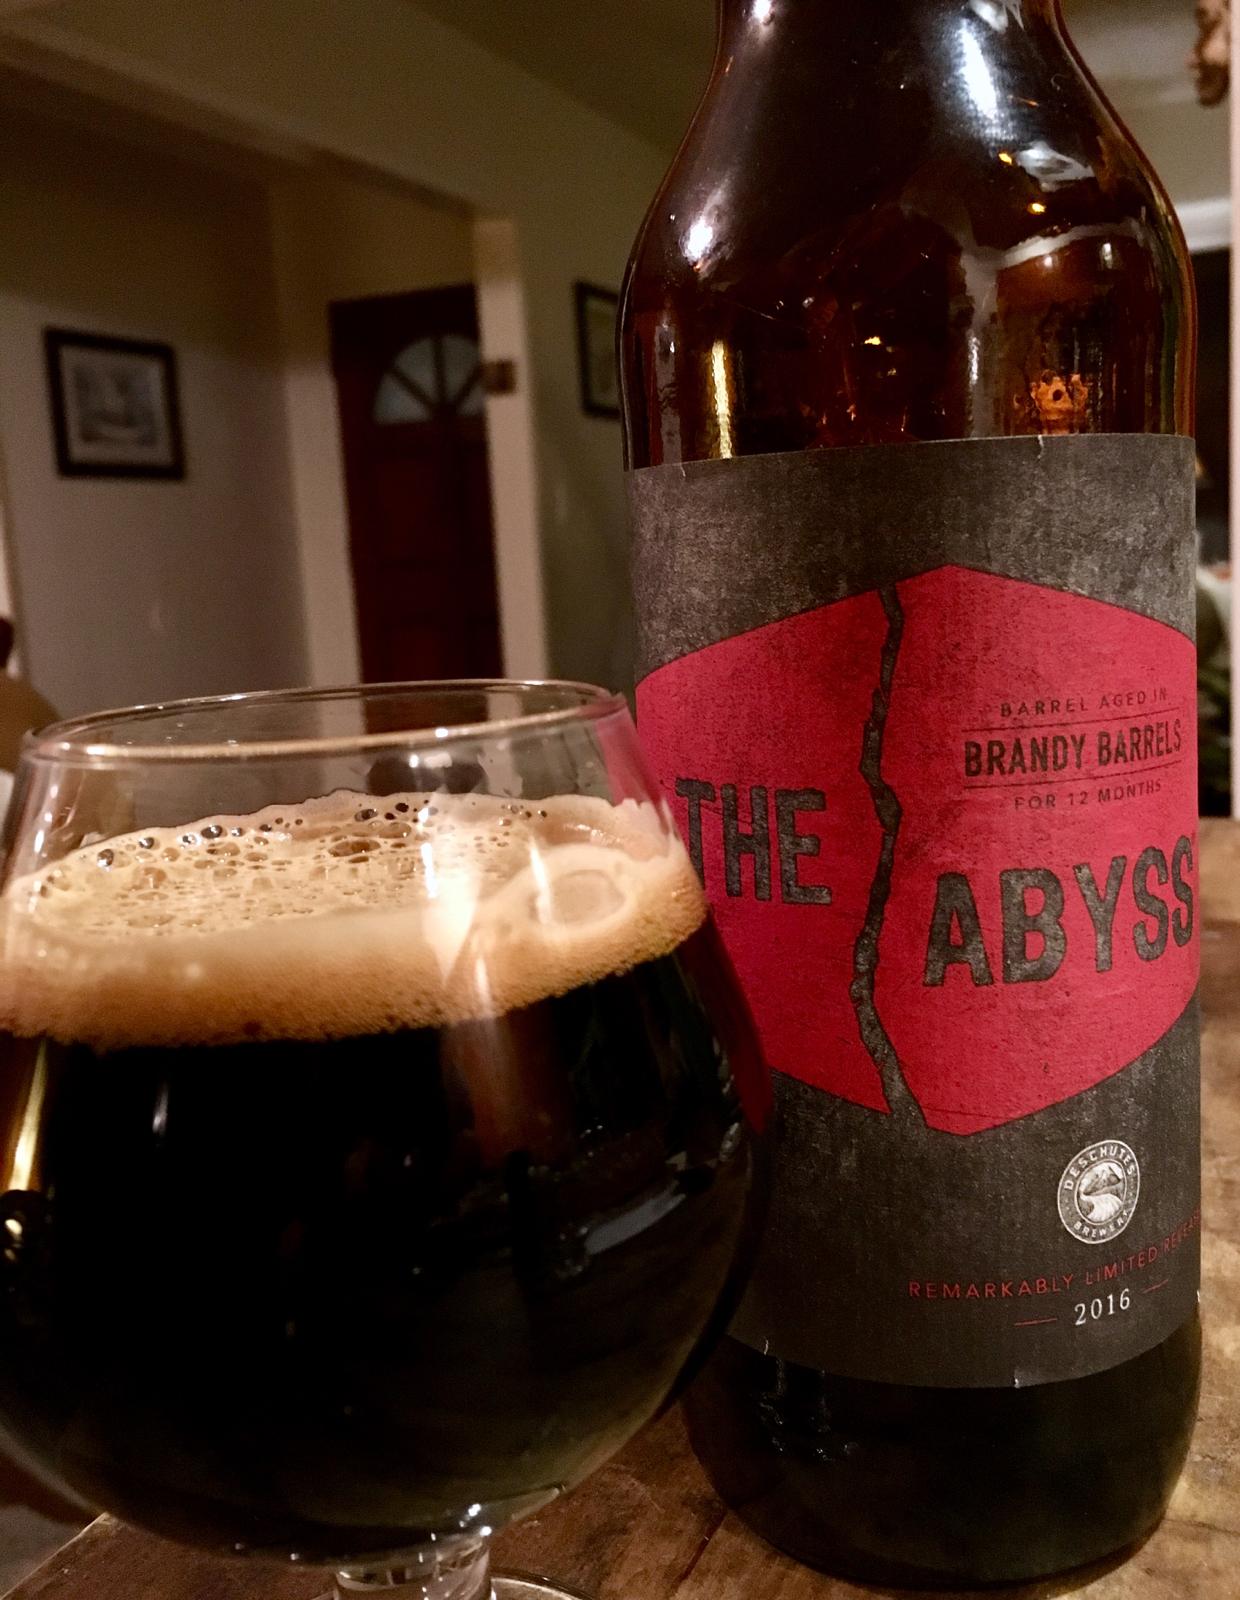 The Abyss (2016 Brandy Barrel Aged)